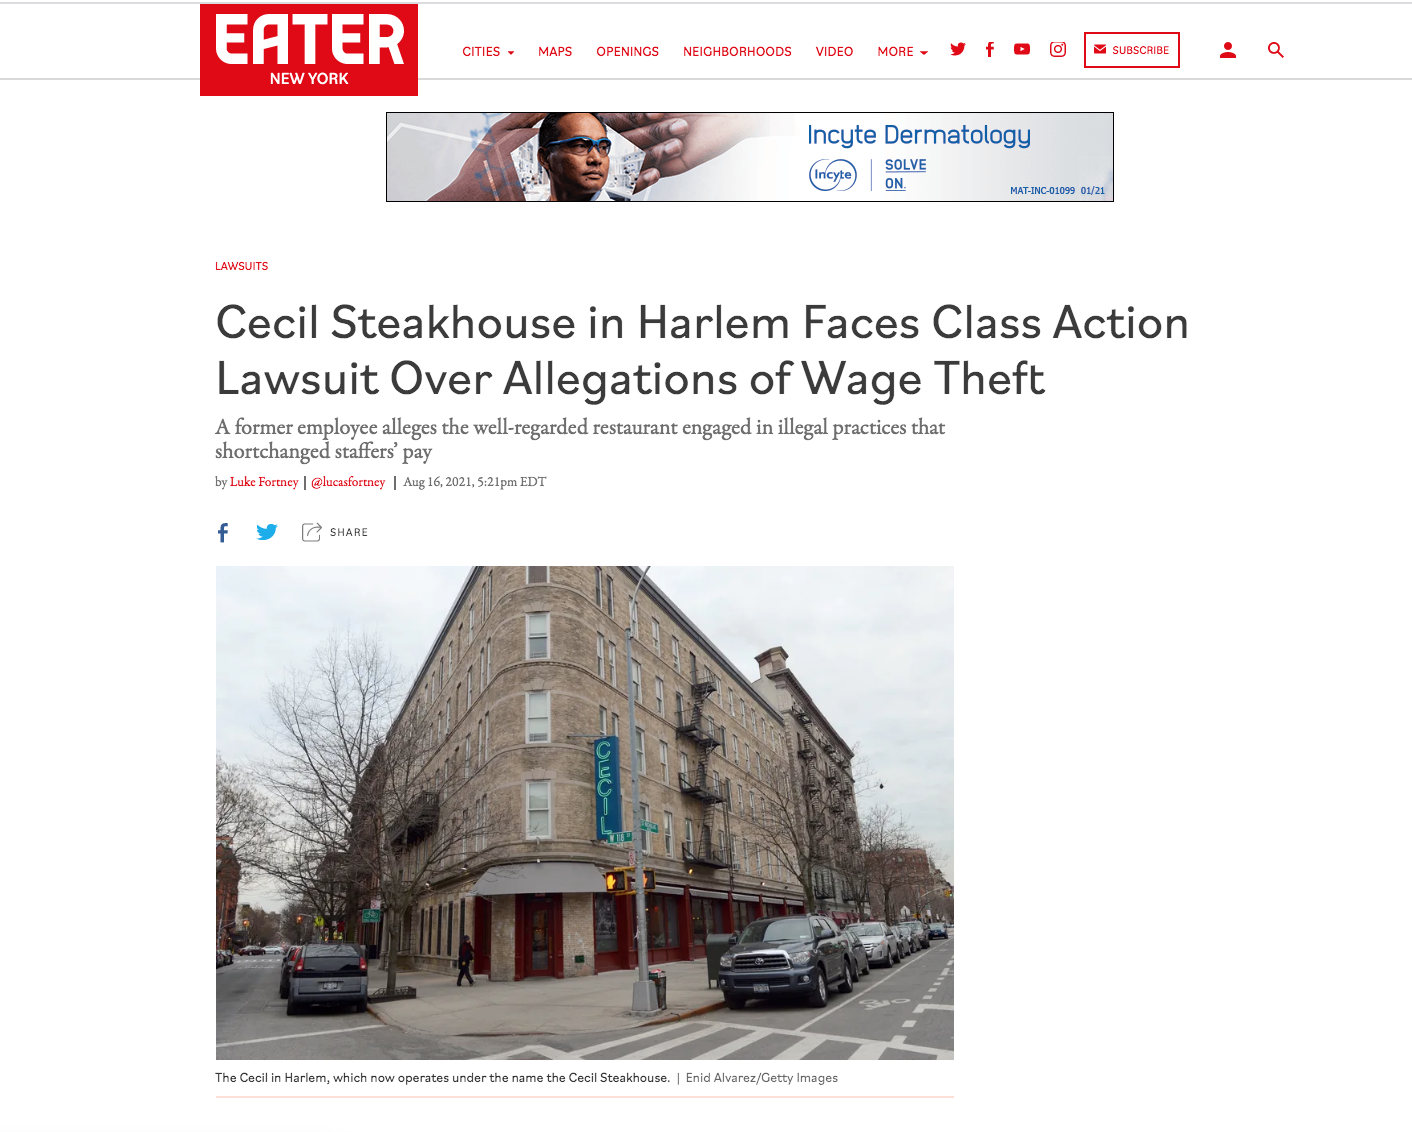 featured image for article on Cecil Steakhouse lawsuit